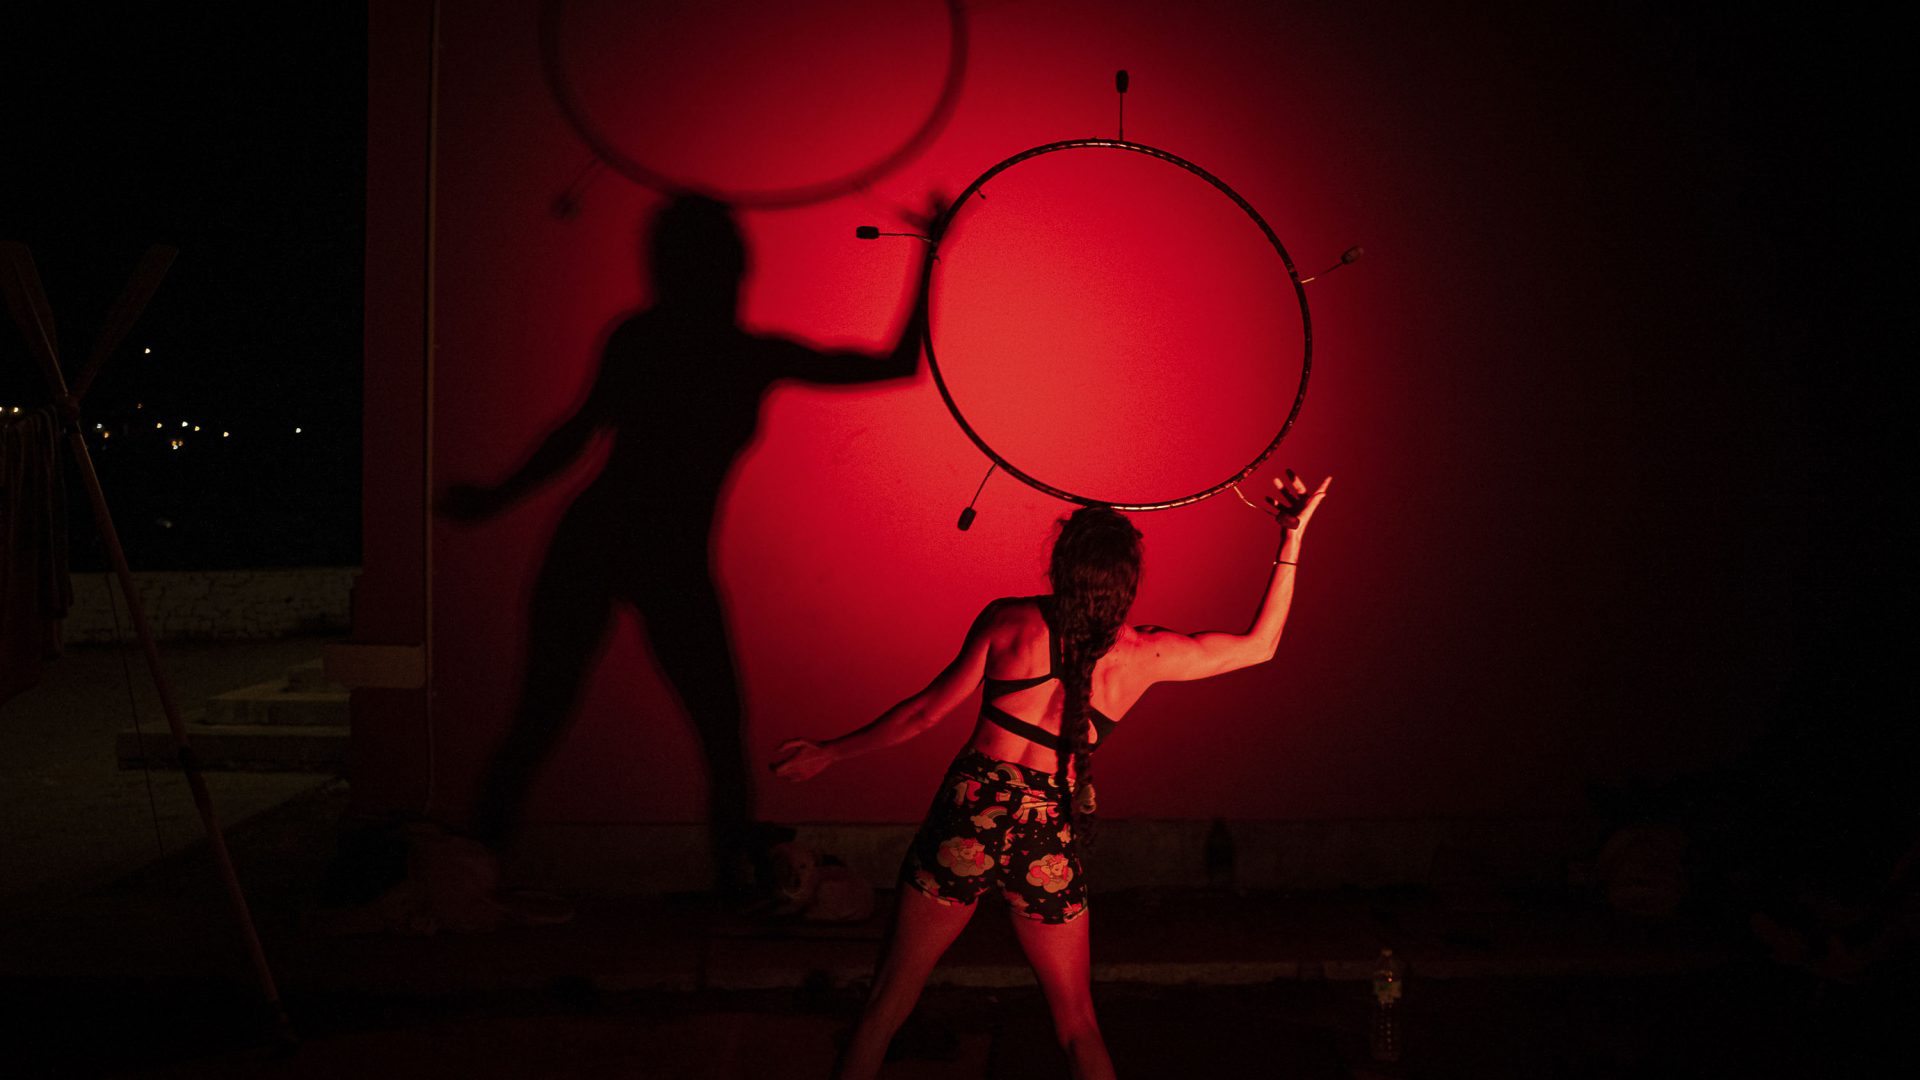 A performer plays with their hula hoop, casting shadows on a red wall.